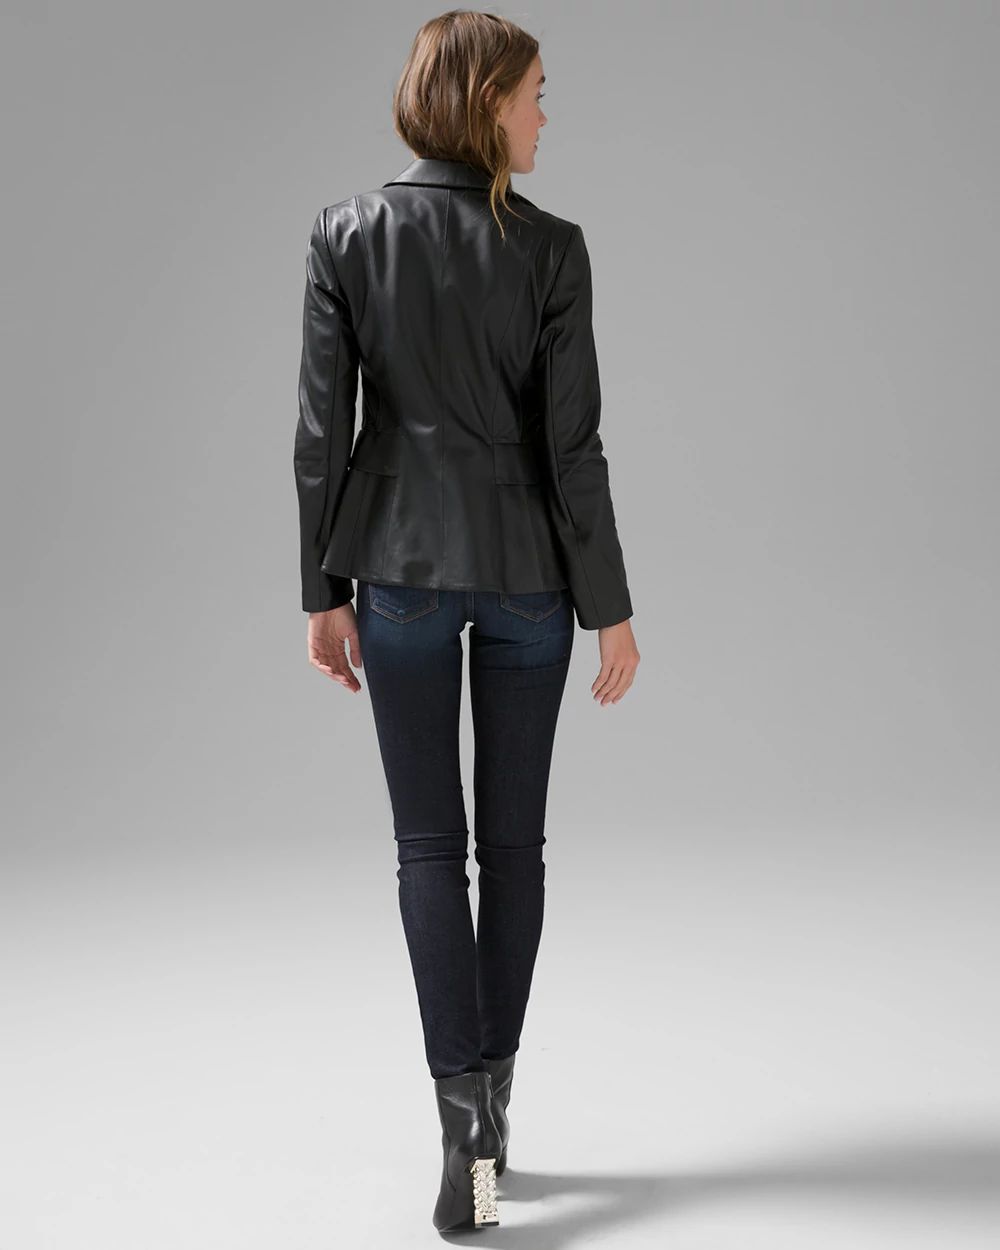 WHBM® Leather Signature Blazer click to view larger image.